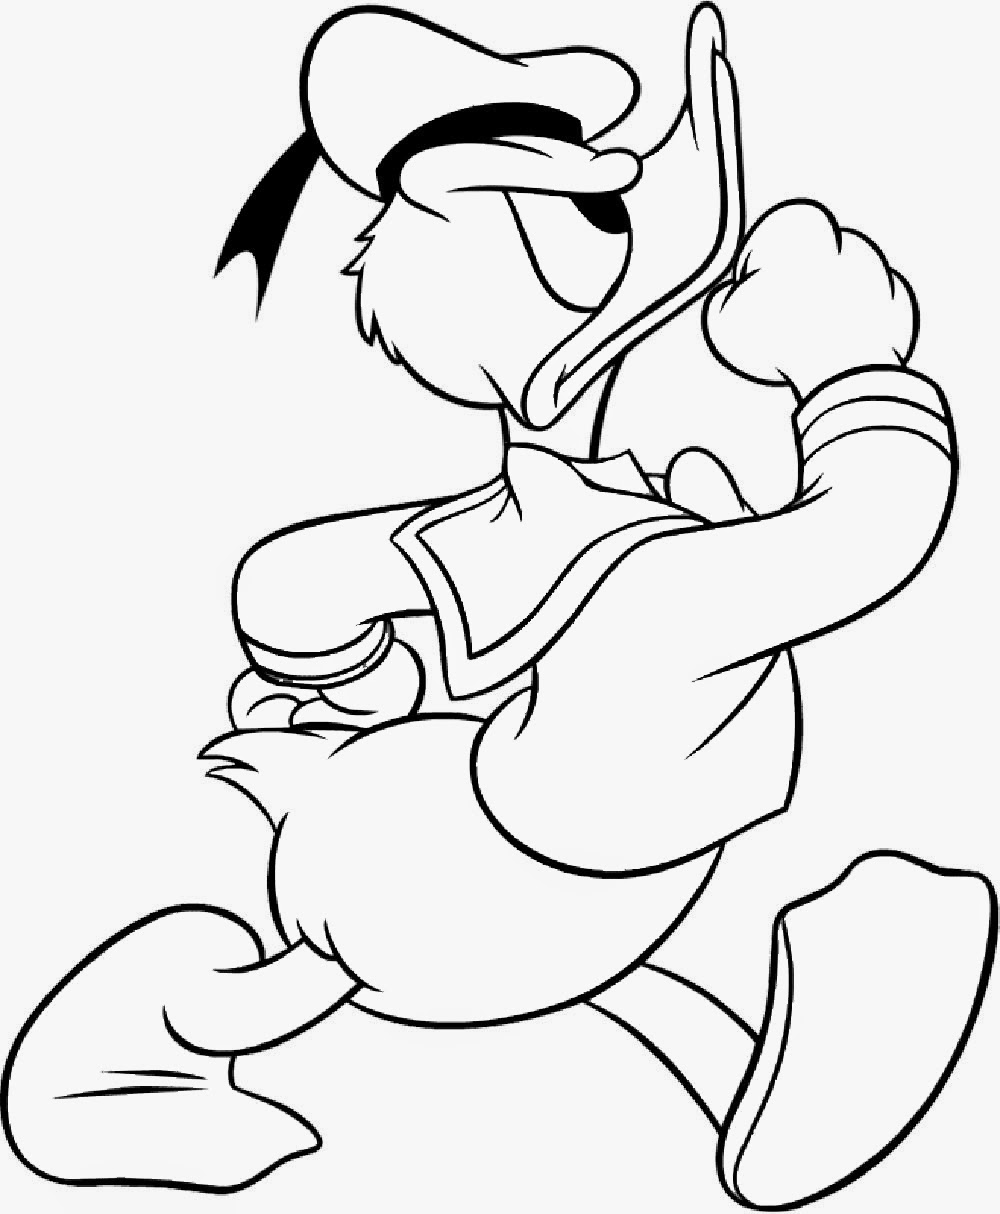 Coloring Blog for Kids: Donald Duck Coloring pages